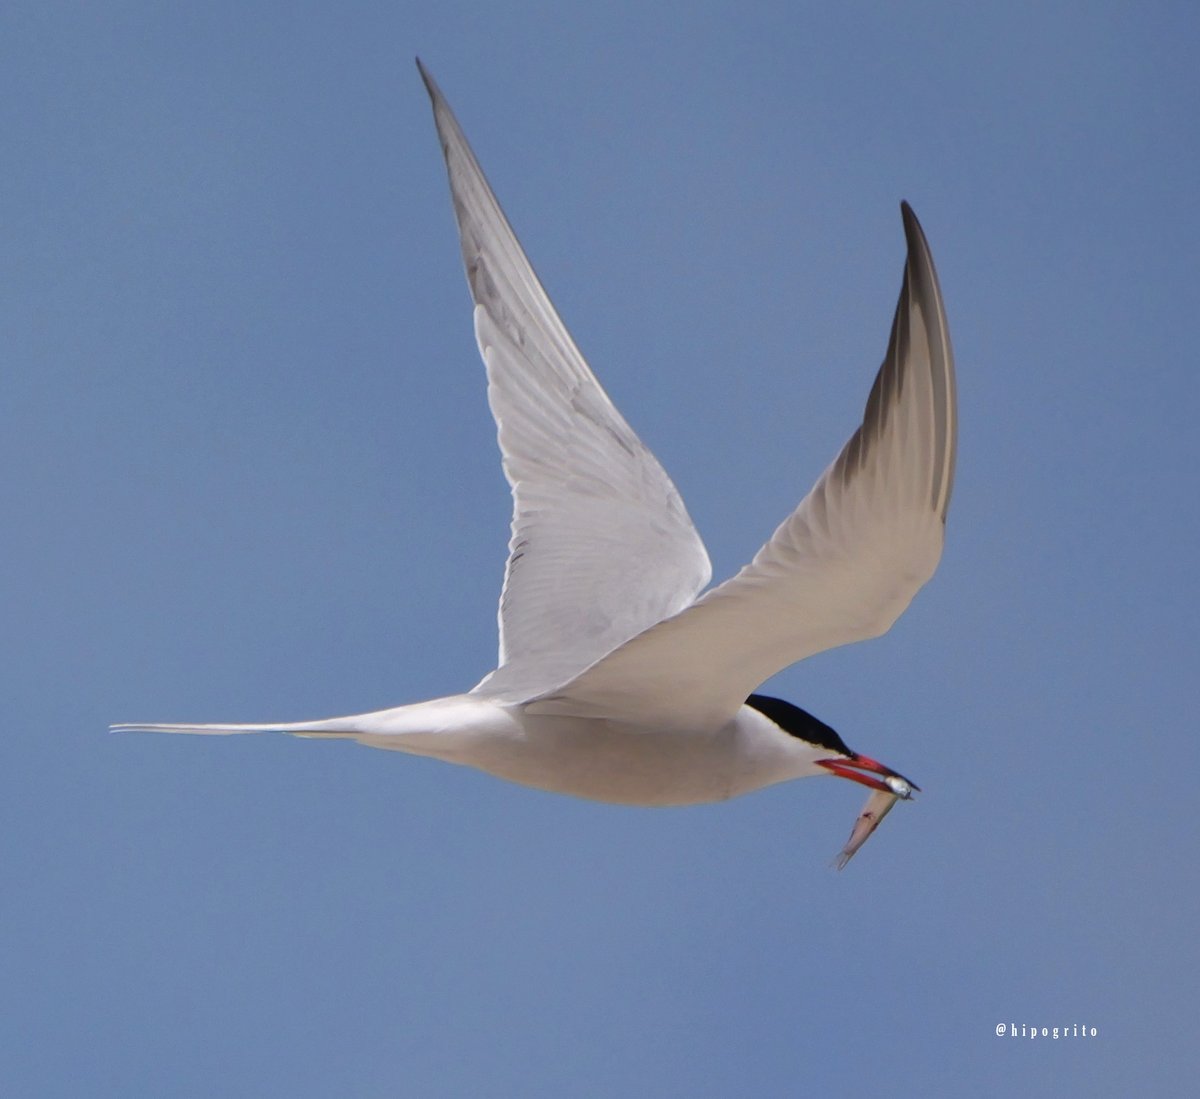 A Common Tern with some lunch. Robert Moses State Park, Long Island, NY #birding #birds #birdwatching